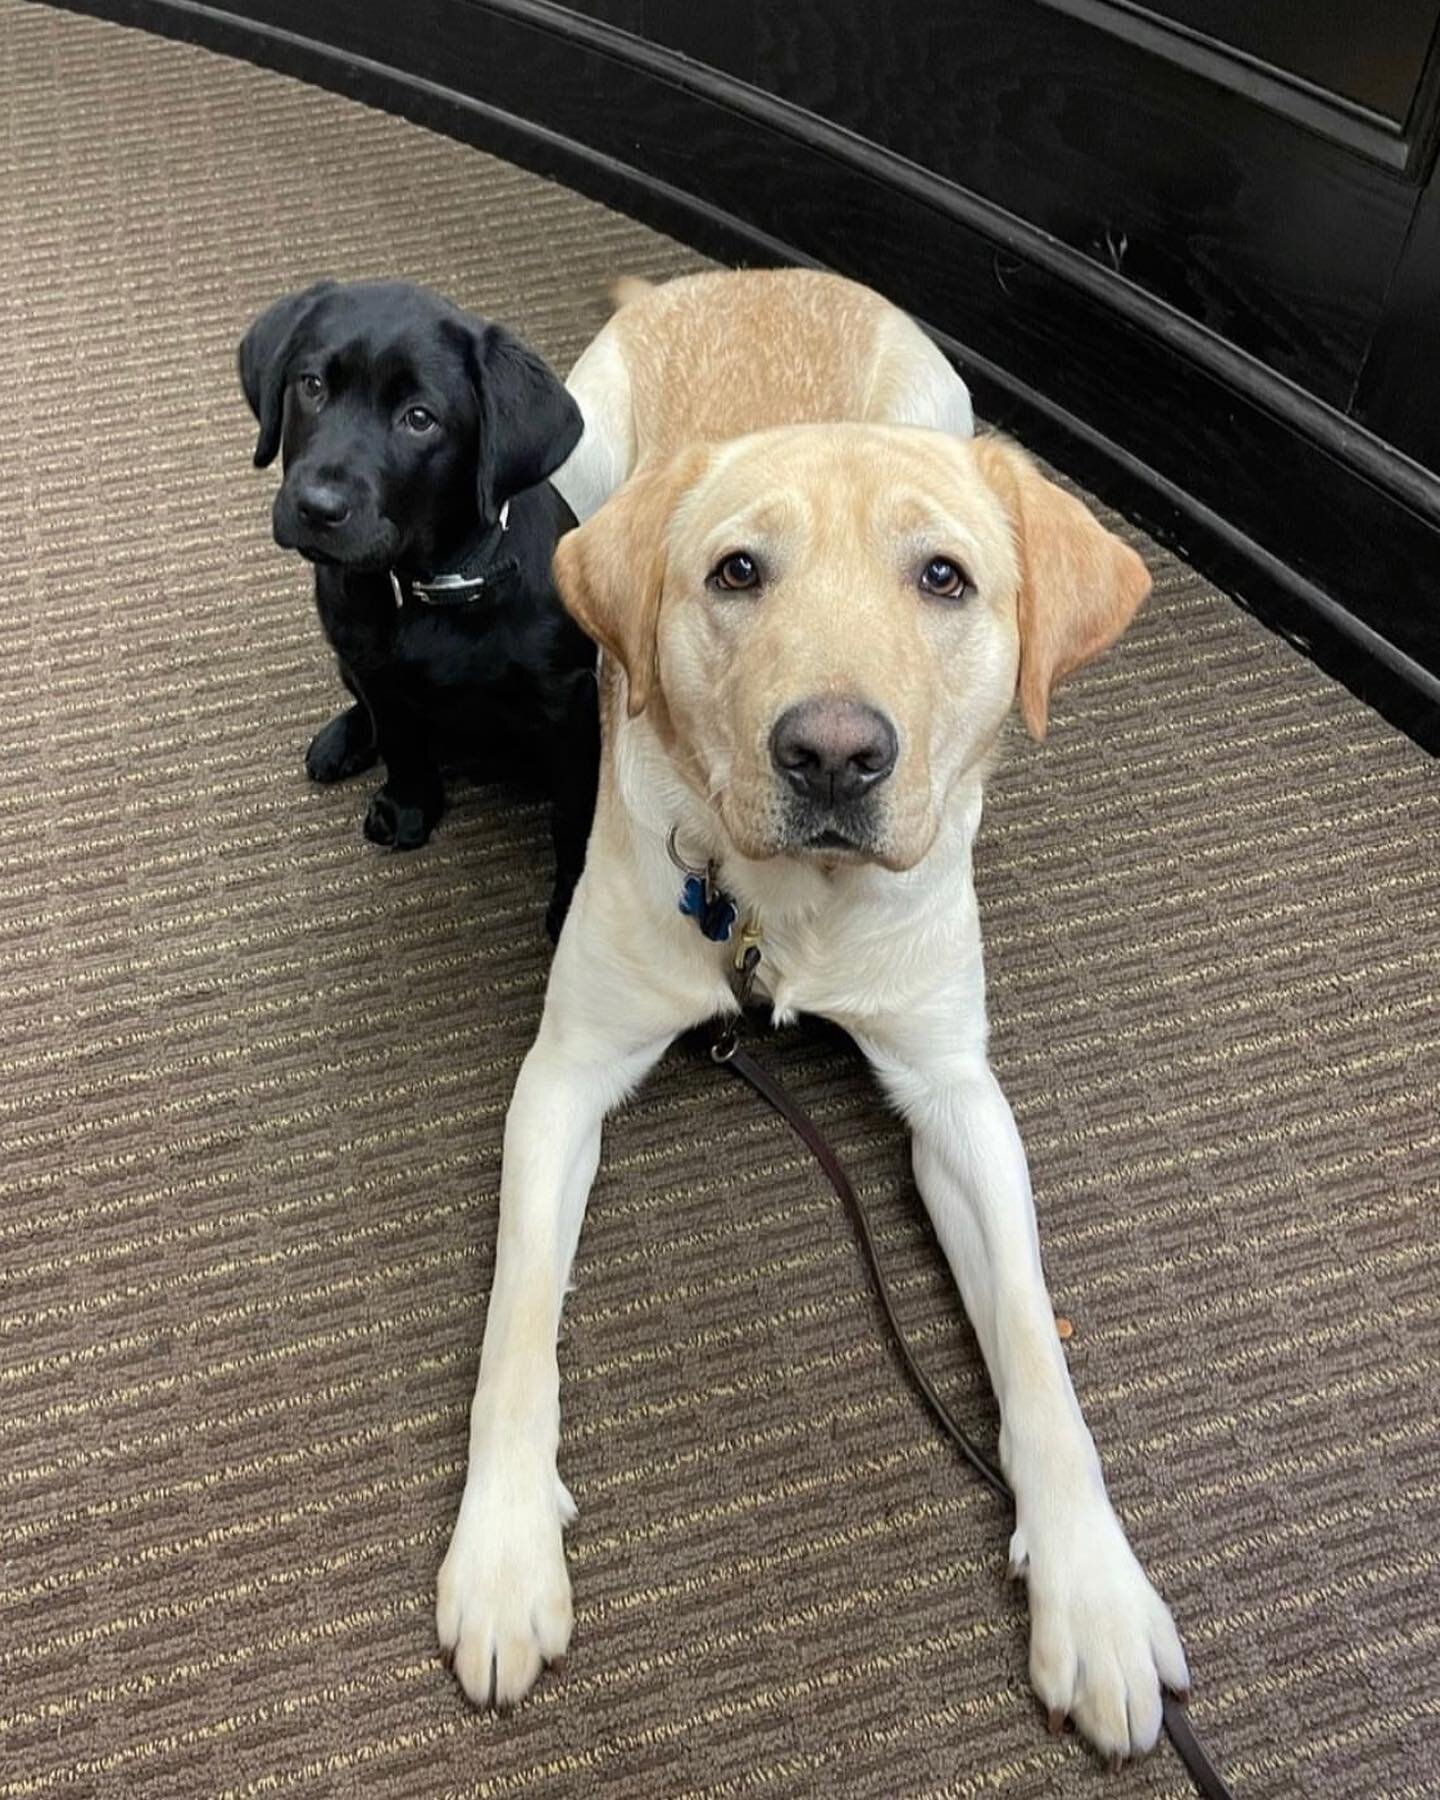 Happy International Guide Dog Day to our amazing future guide dogs Candy and Zach! 

Photo descriptions:
1. Candy, a small black lab sits to the left of large yellow lab Zach, who is laying down. Both are looking at the camera.
2. Zach sits in front 